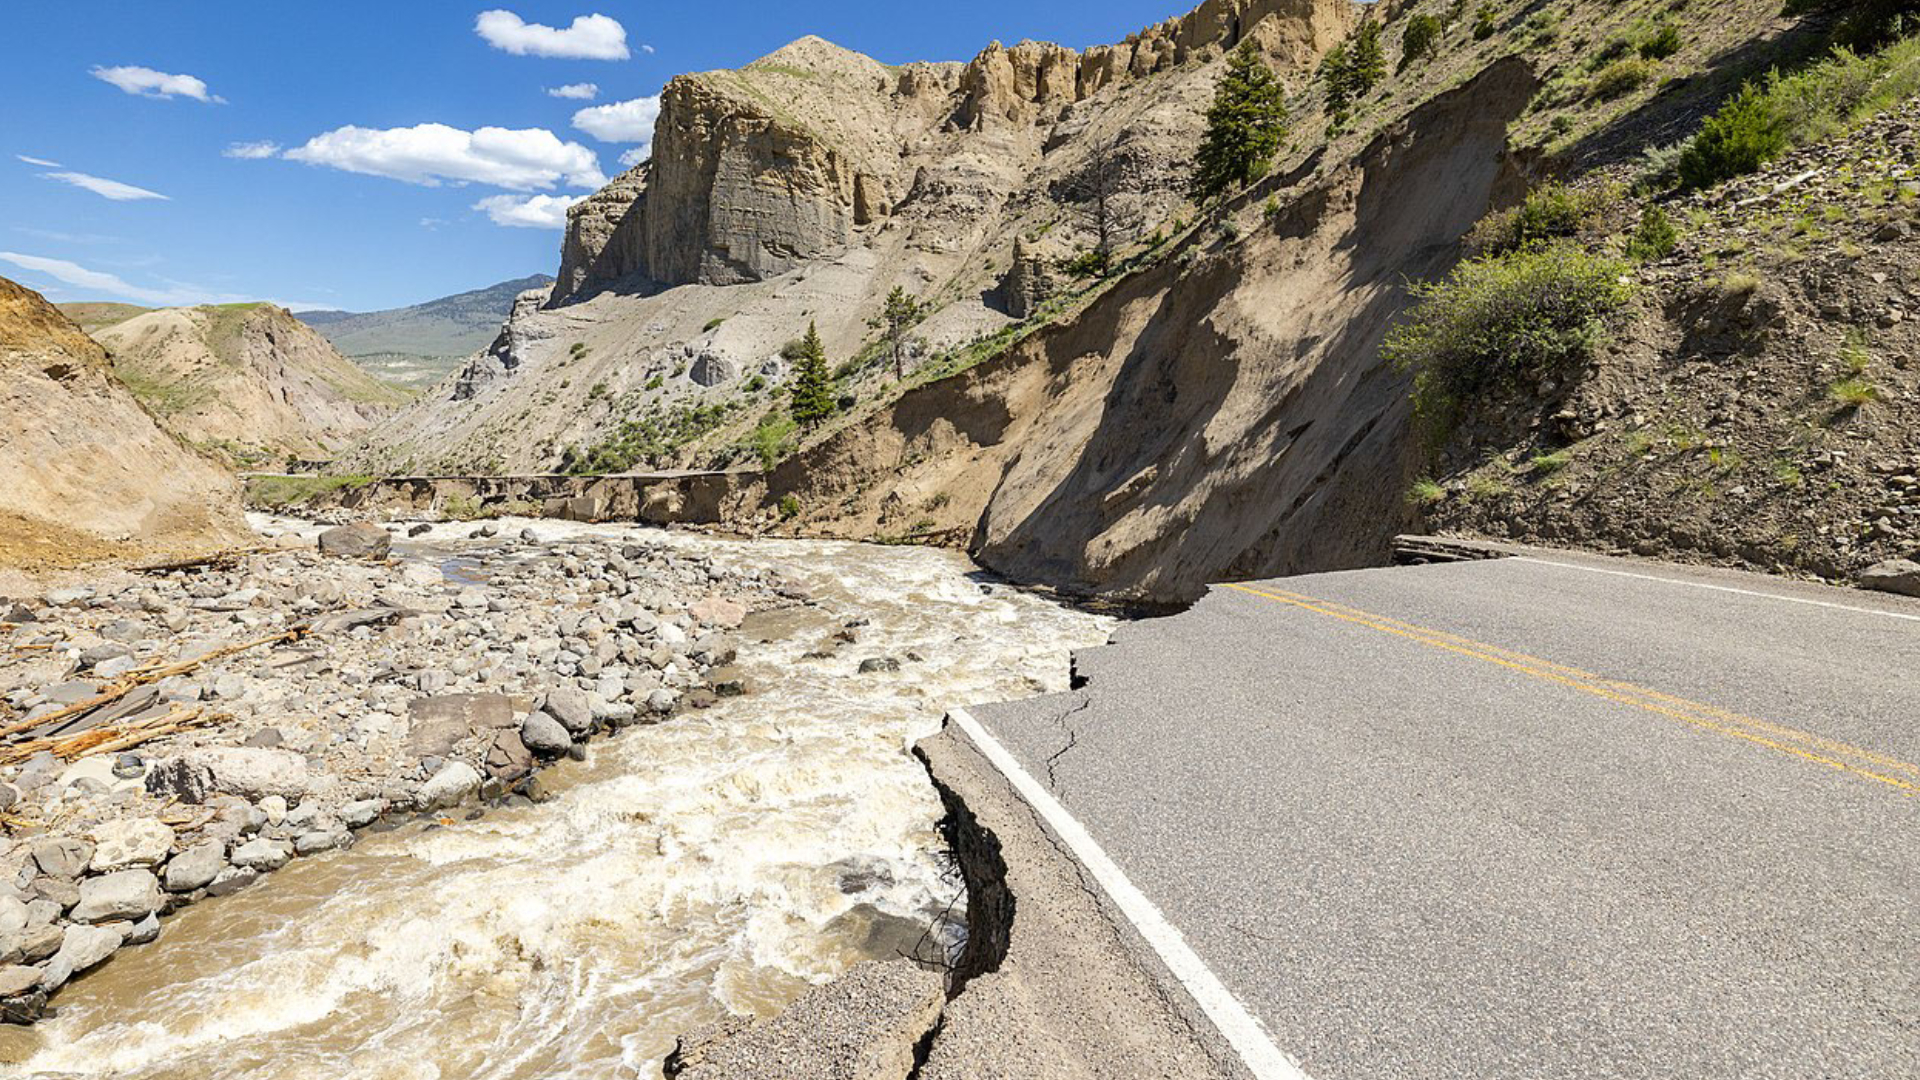 Washed out road in Yellowstone Park